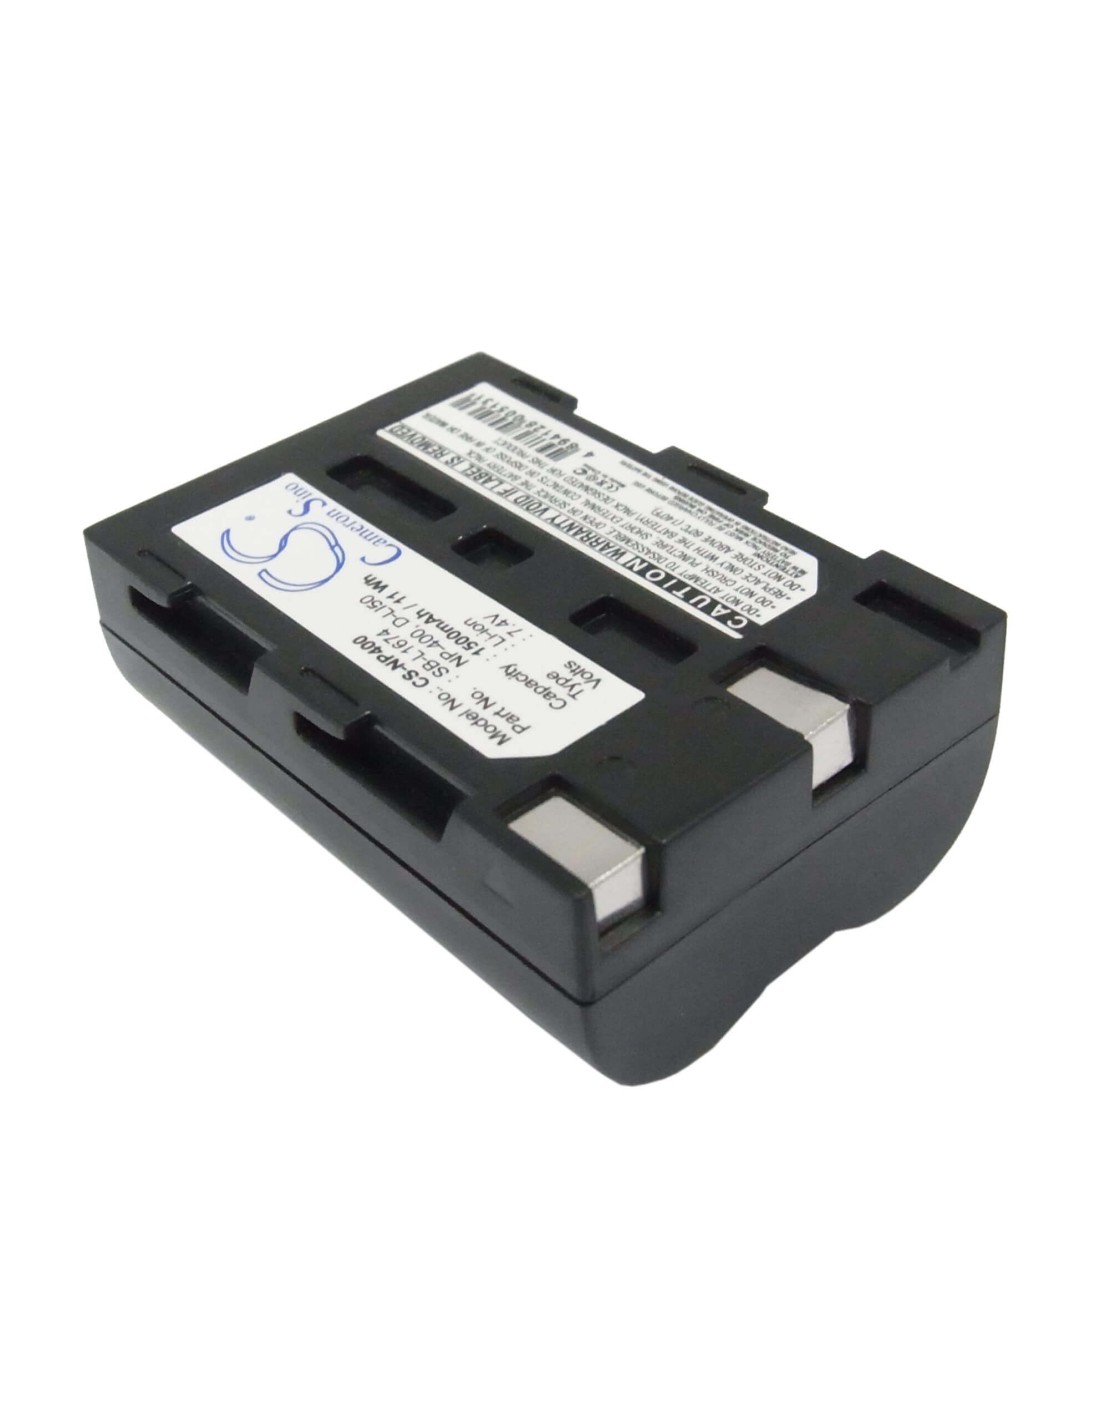 Battery for Sigma Sd14 7.4V, 1500mAh - 11.10Wh